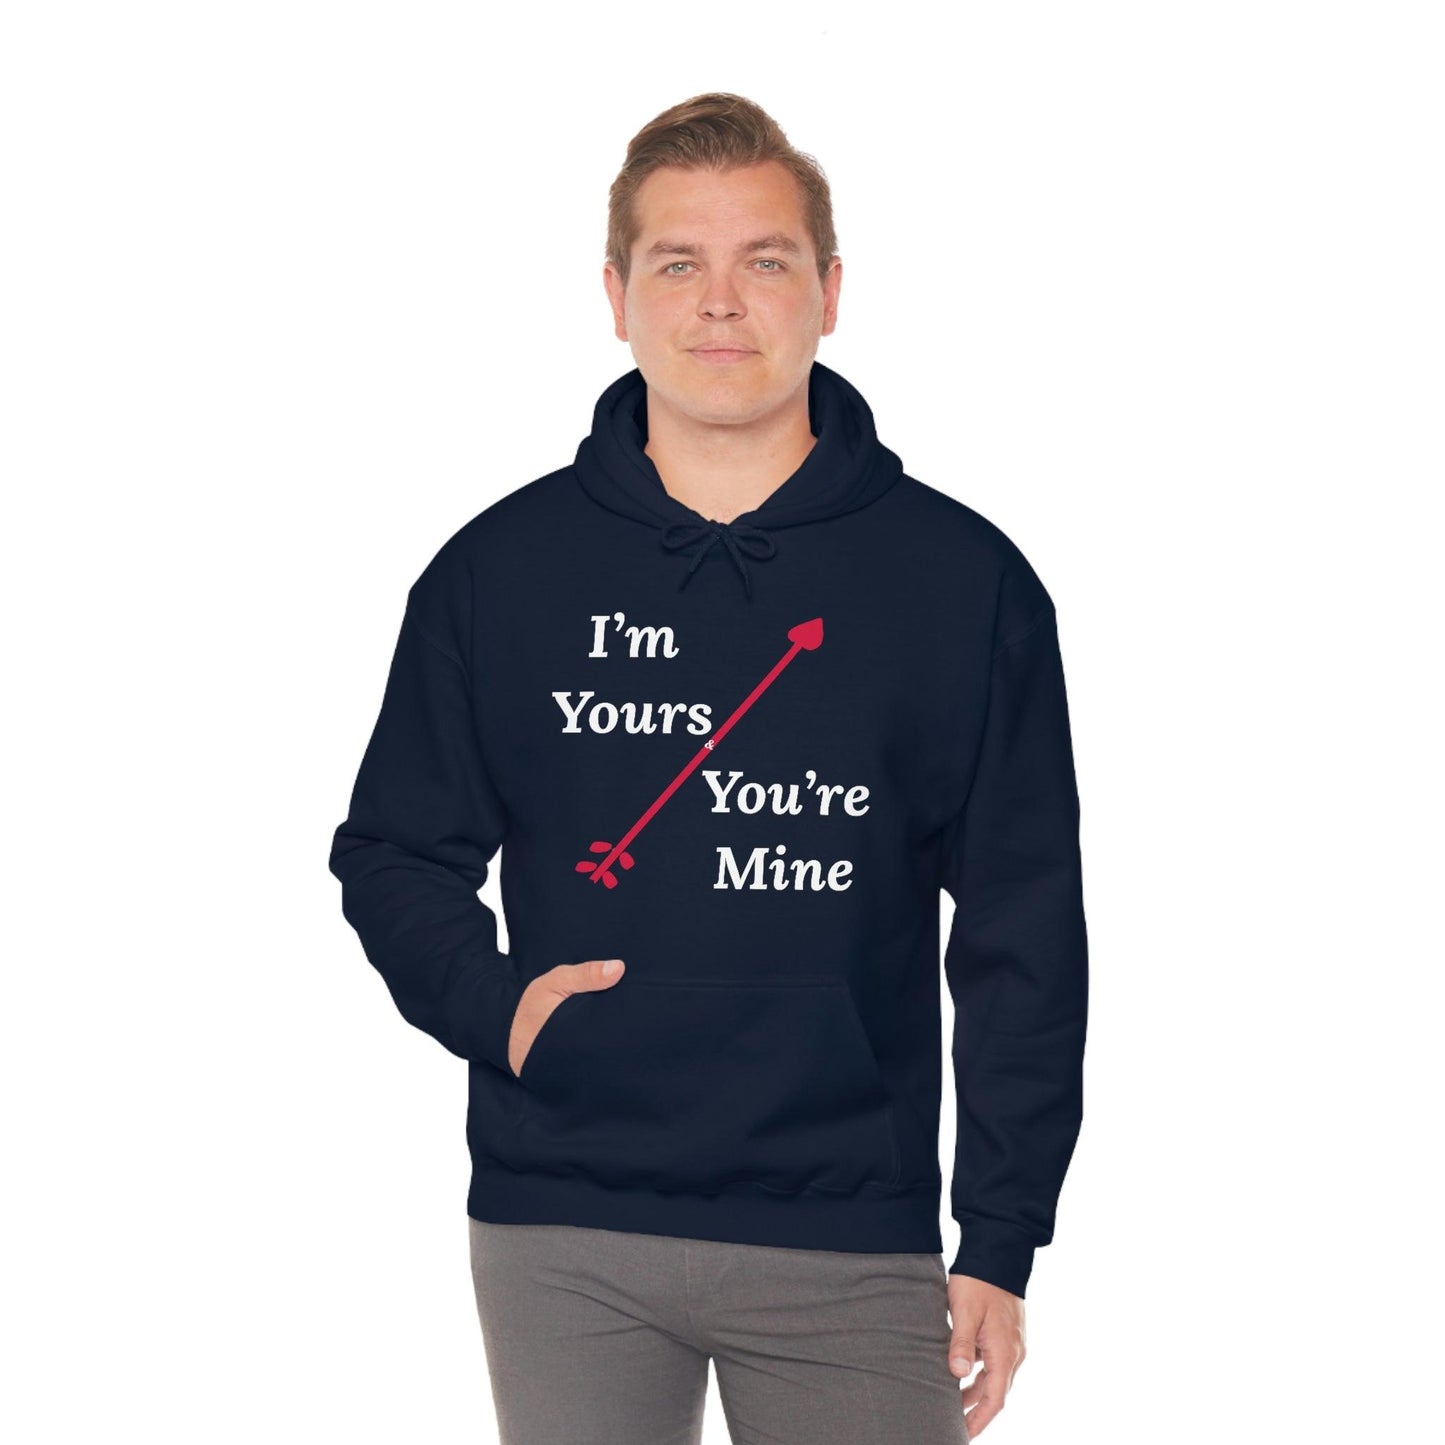 I'm Yours and You're Mine Hooded Sweatshirt